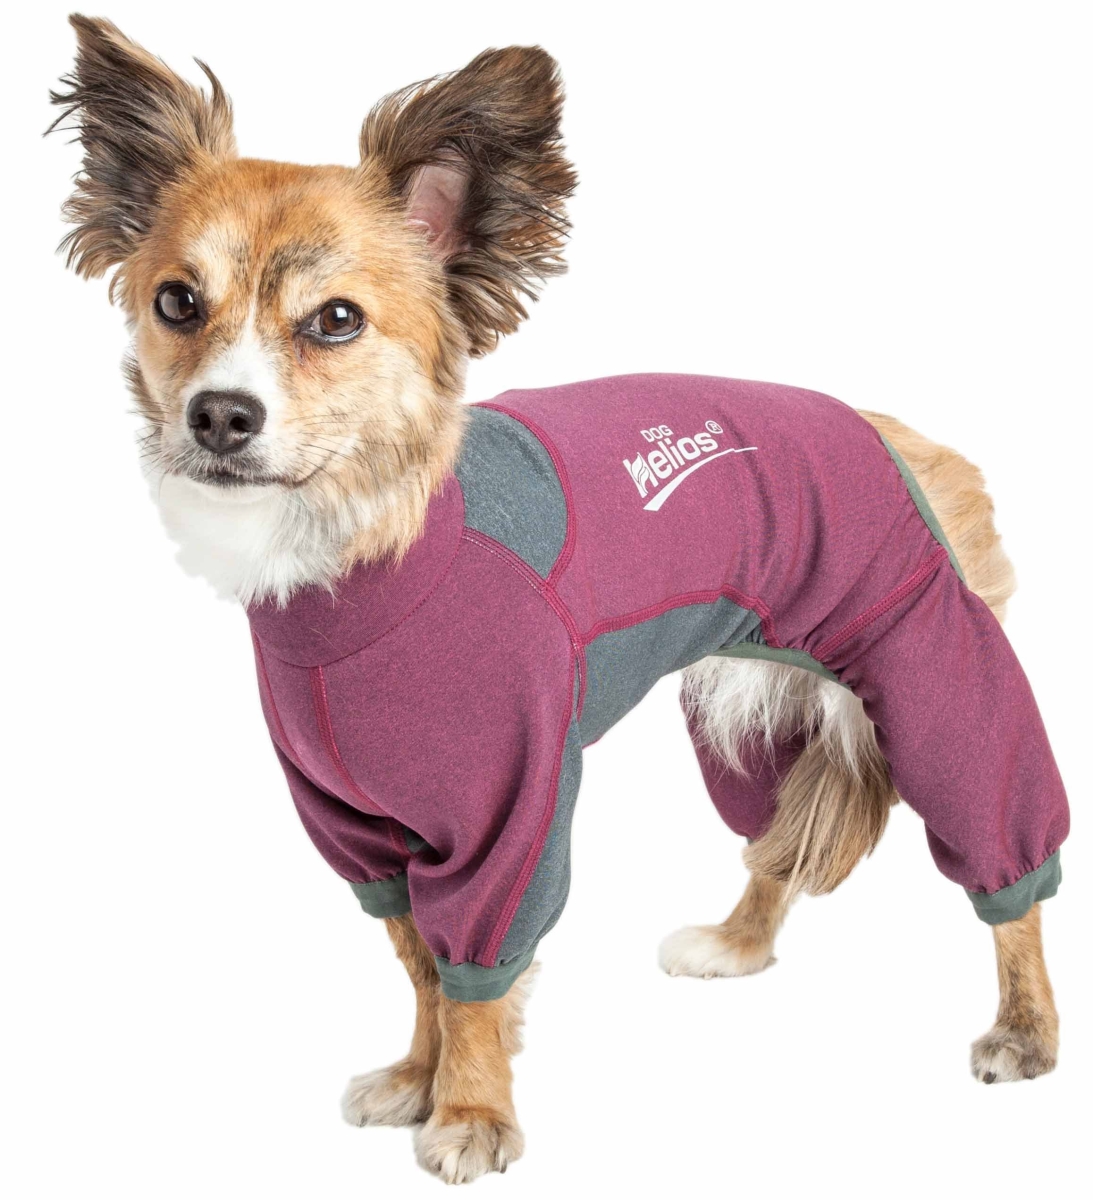 Yghl8pkxl Rufflex 4-way-stretch Breathable Full Bodied Performance Dog Warmup Track Suit - Pink & Grey, Extra Large